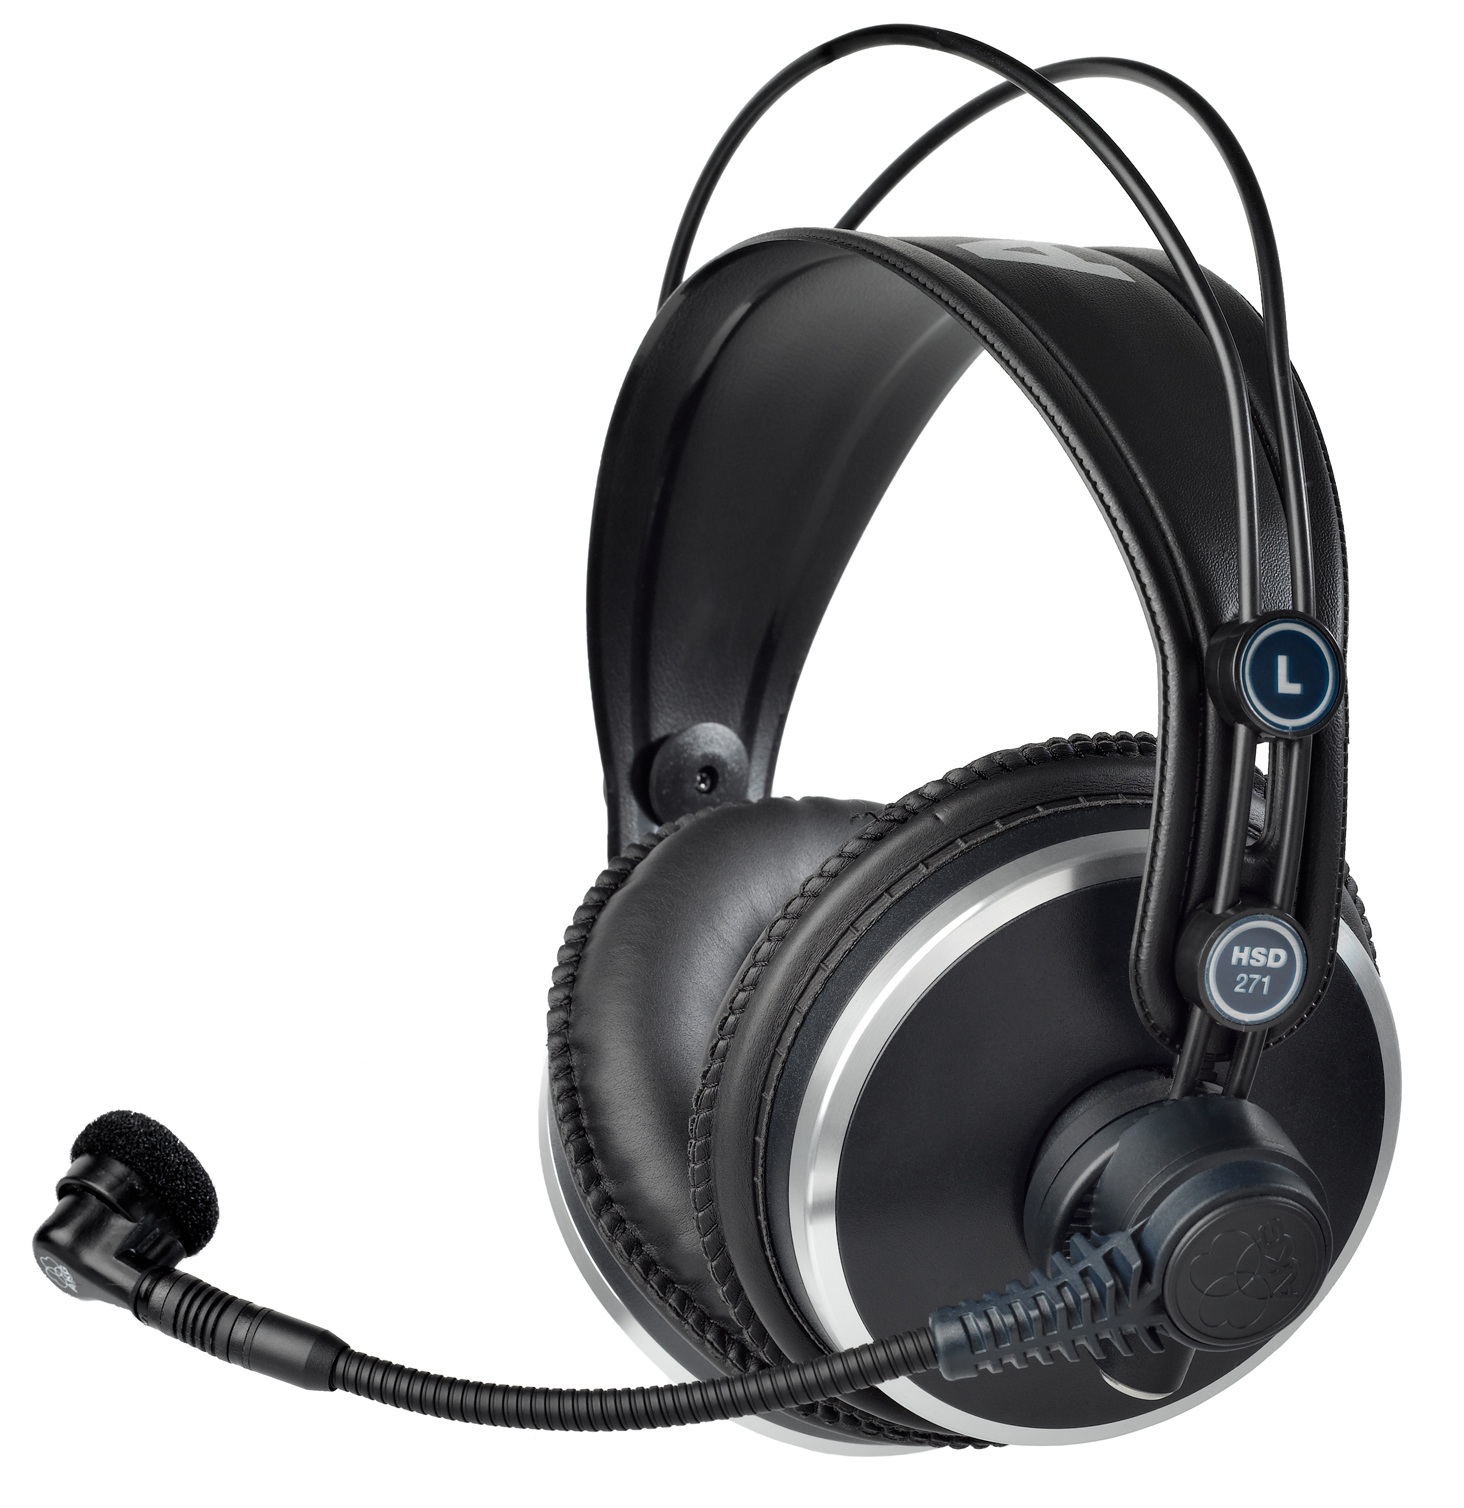 compliance processing Climatic mountains AKG HSD271 Professional over-ear headset with dynamic microphone ·  Soundtools